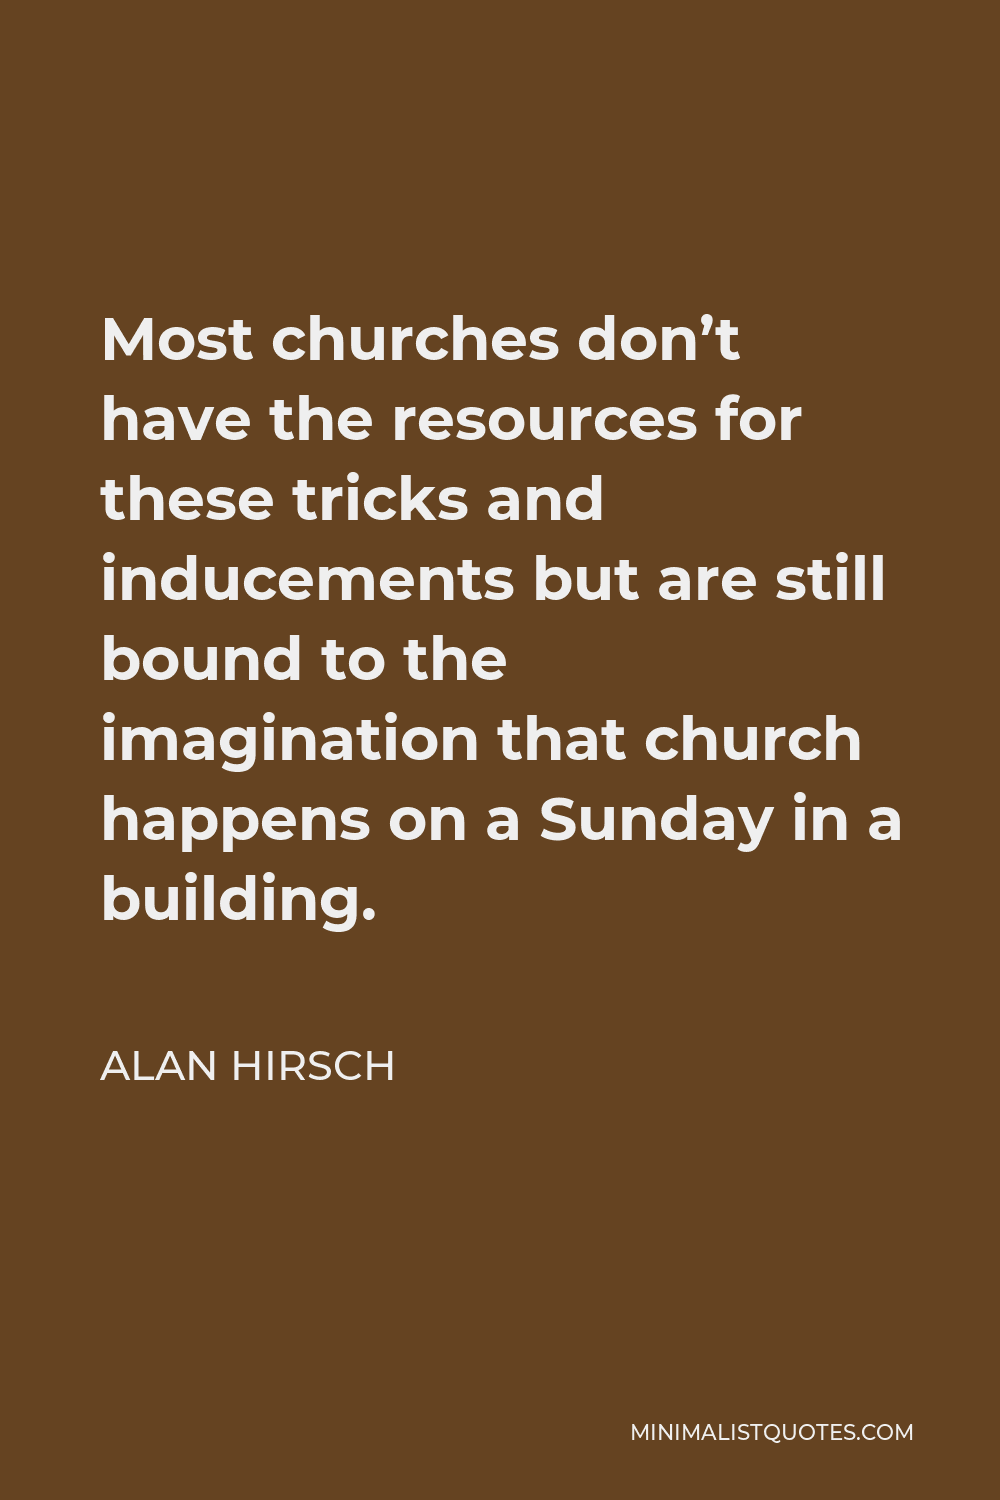 Alan Hirsch Quote - Most churches don’t have the resources for these tricks and inducements but are still bound to the imagination that church happens on a Sunday in a building.